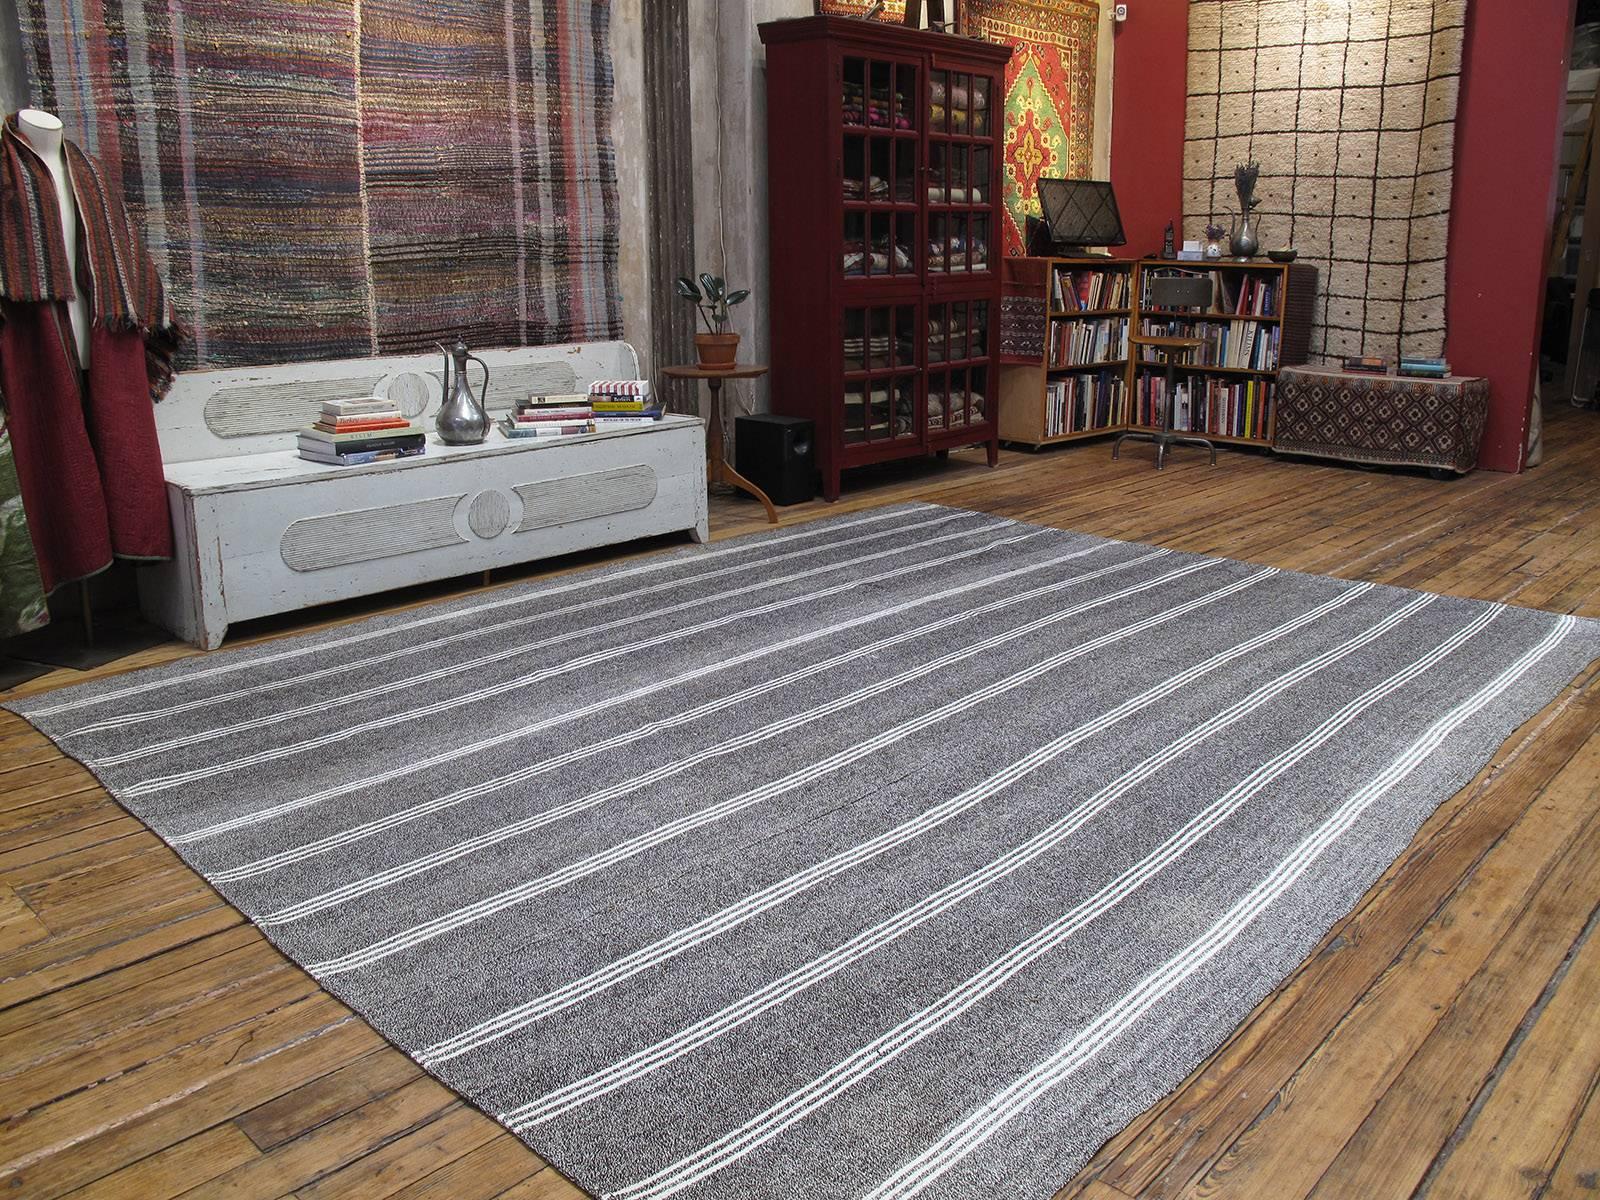 Kilim rug with vertical stripes in white cotton. A simple old tribal flat-weave rug from South-Eastern Turkey, woven with an ingenious mixture of goat hair and cotton, originally used as an everyday floor cover or in the fields during harvest time.